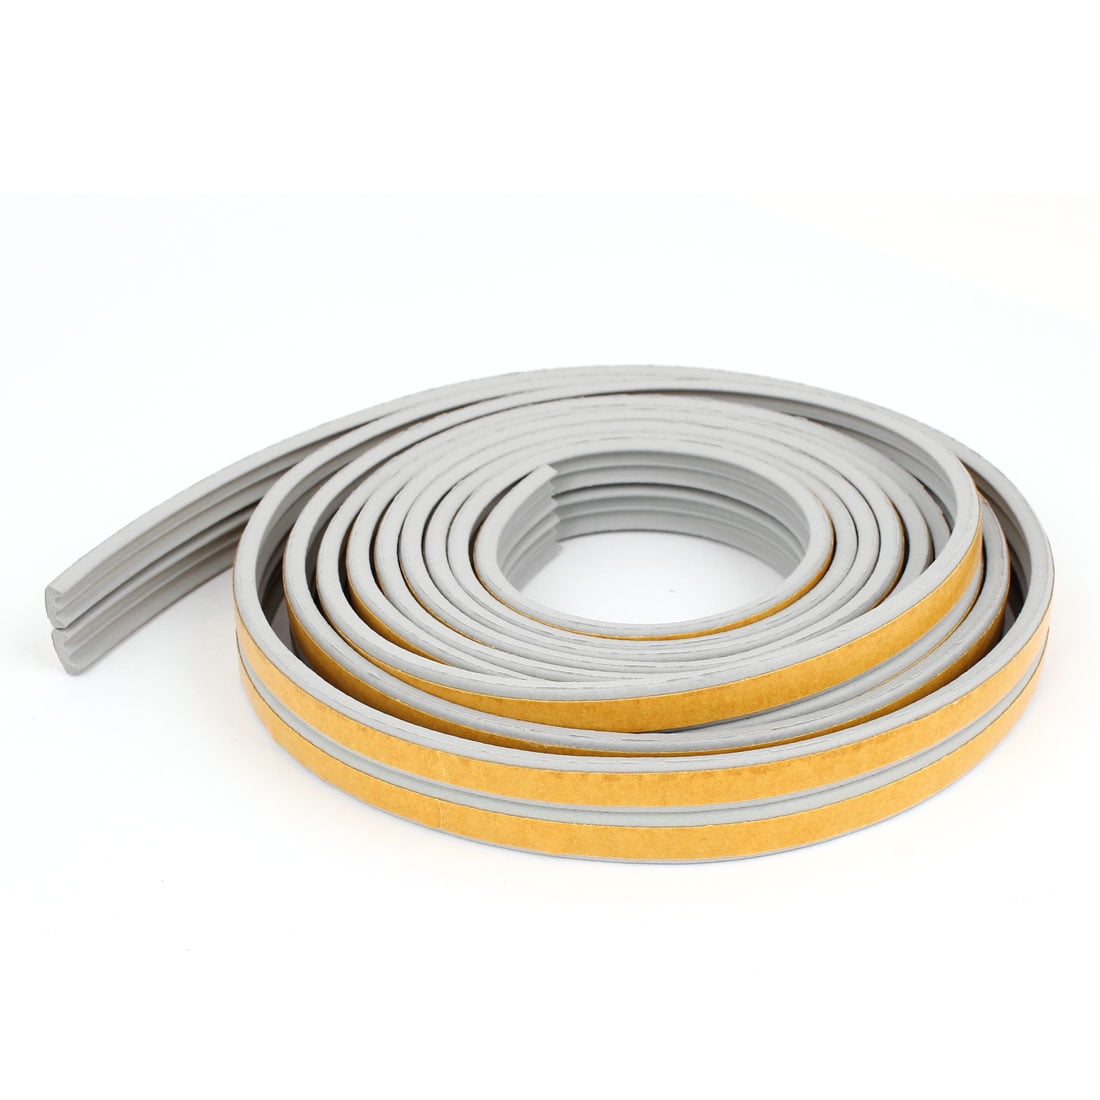 Willstar Silicone Draught Excluder Weather Seal Strip Insulation